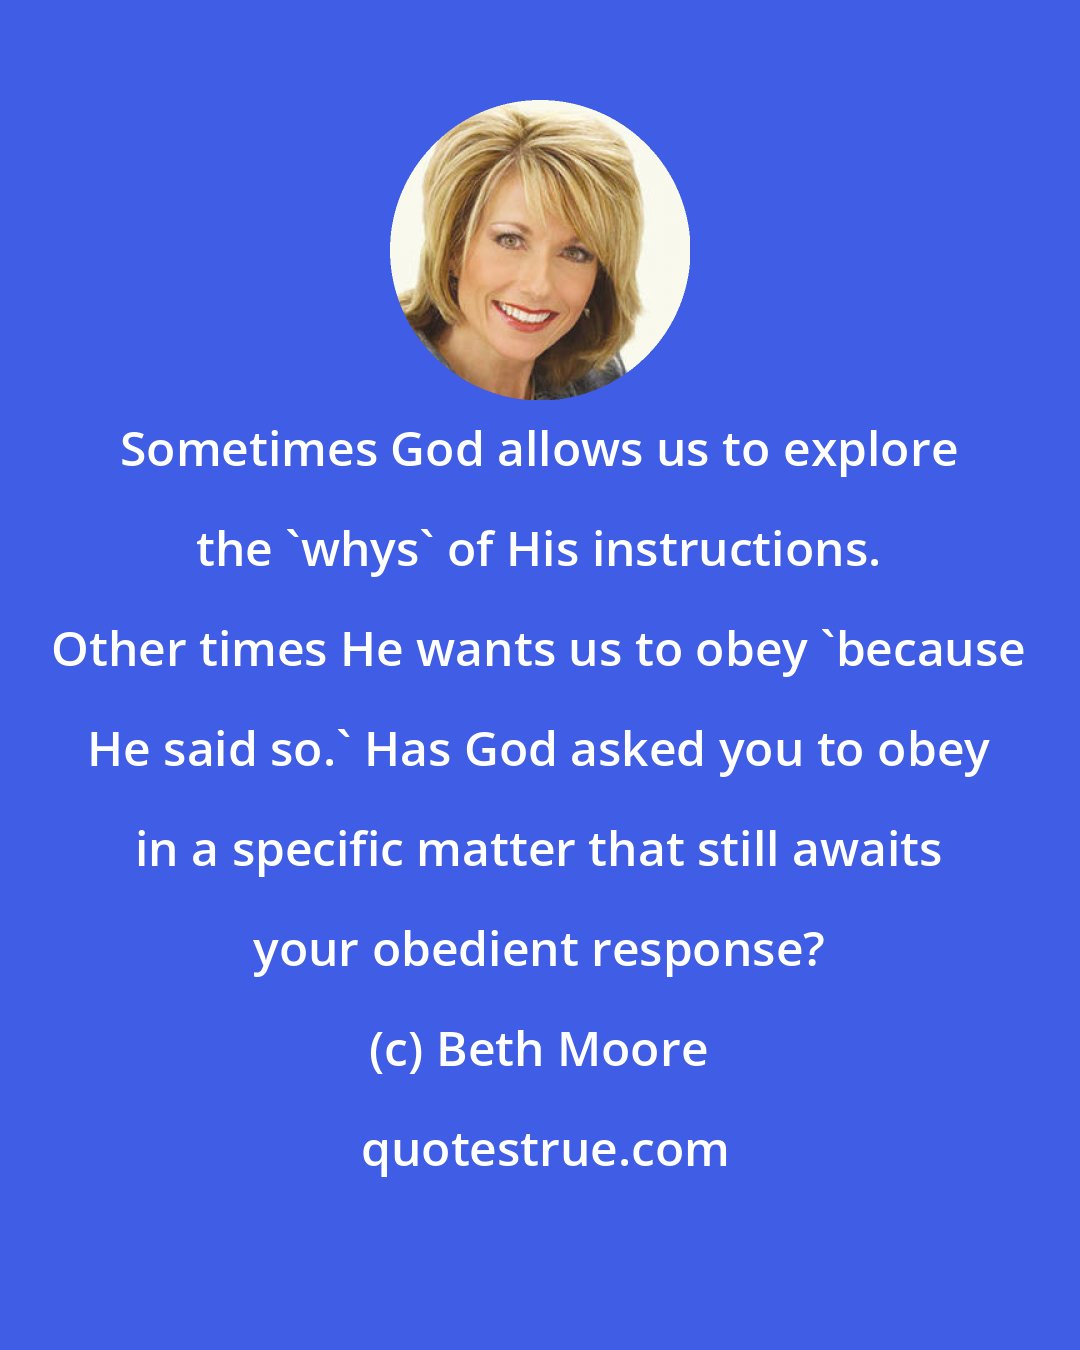 Beth Moore: Sometimes God allows us to explore the 'whys' of His instructions. Other times He wants us to obey 'because He said so.' Has God asked you to obey in a specific matter that still awaits your obedient response?